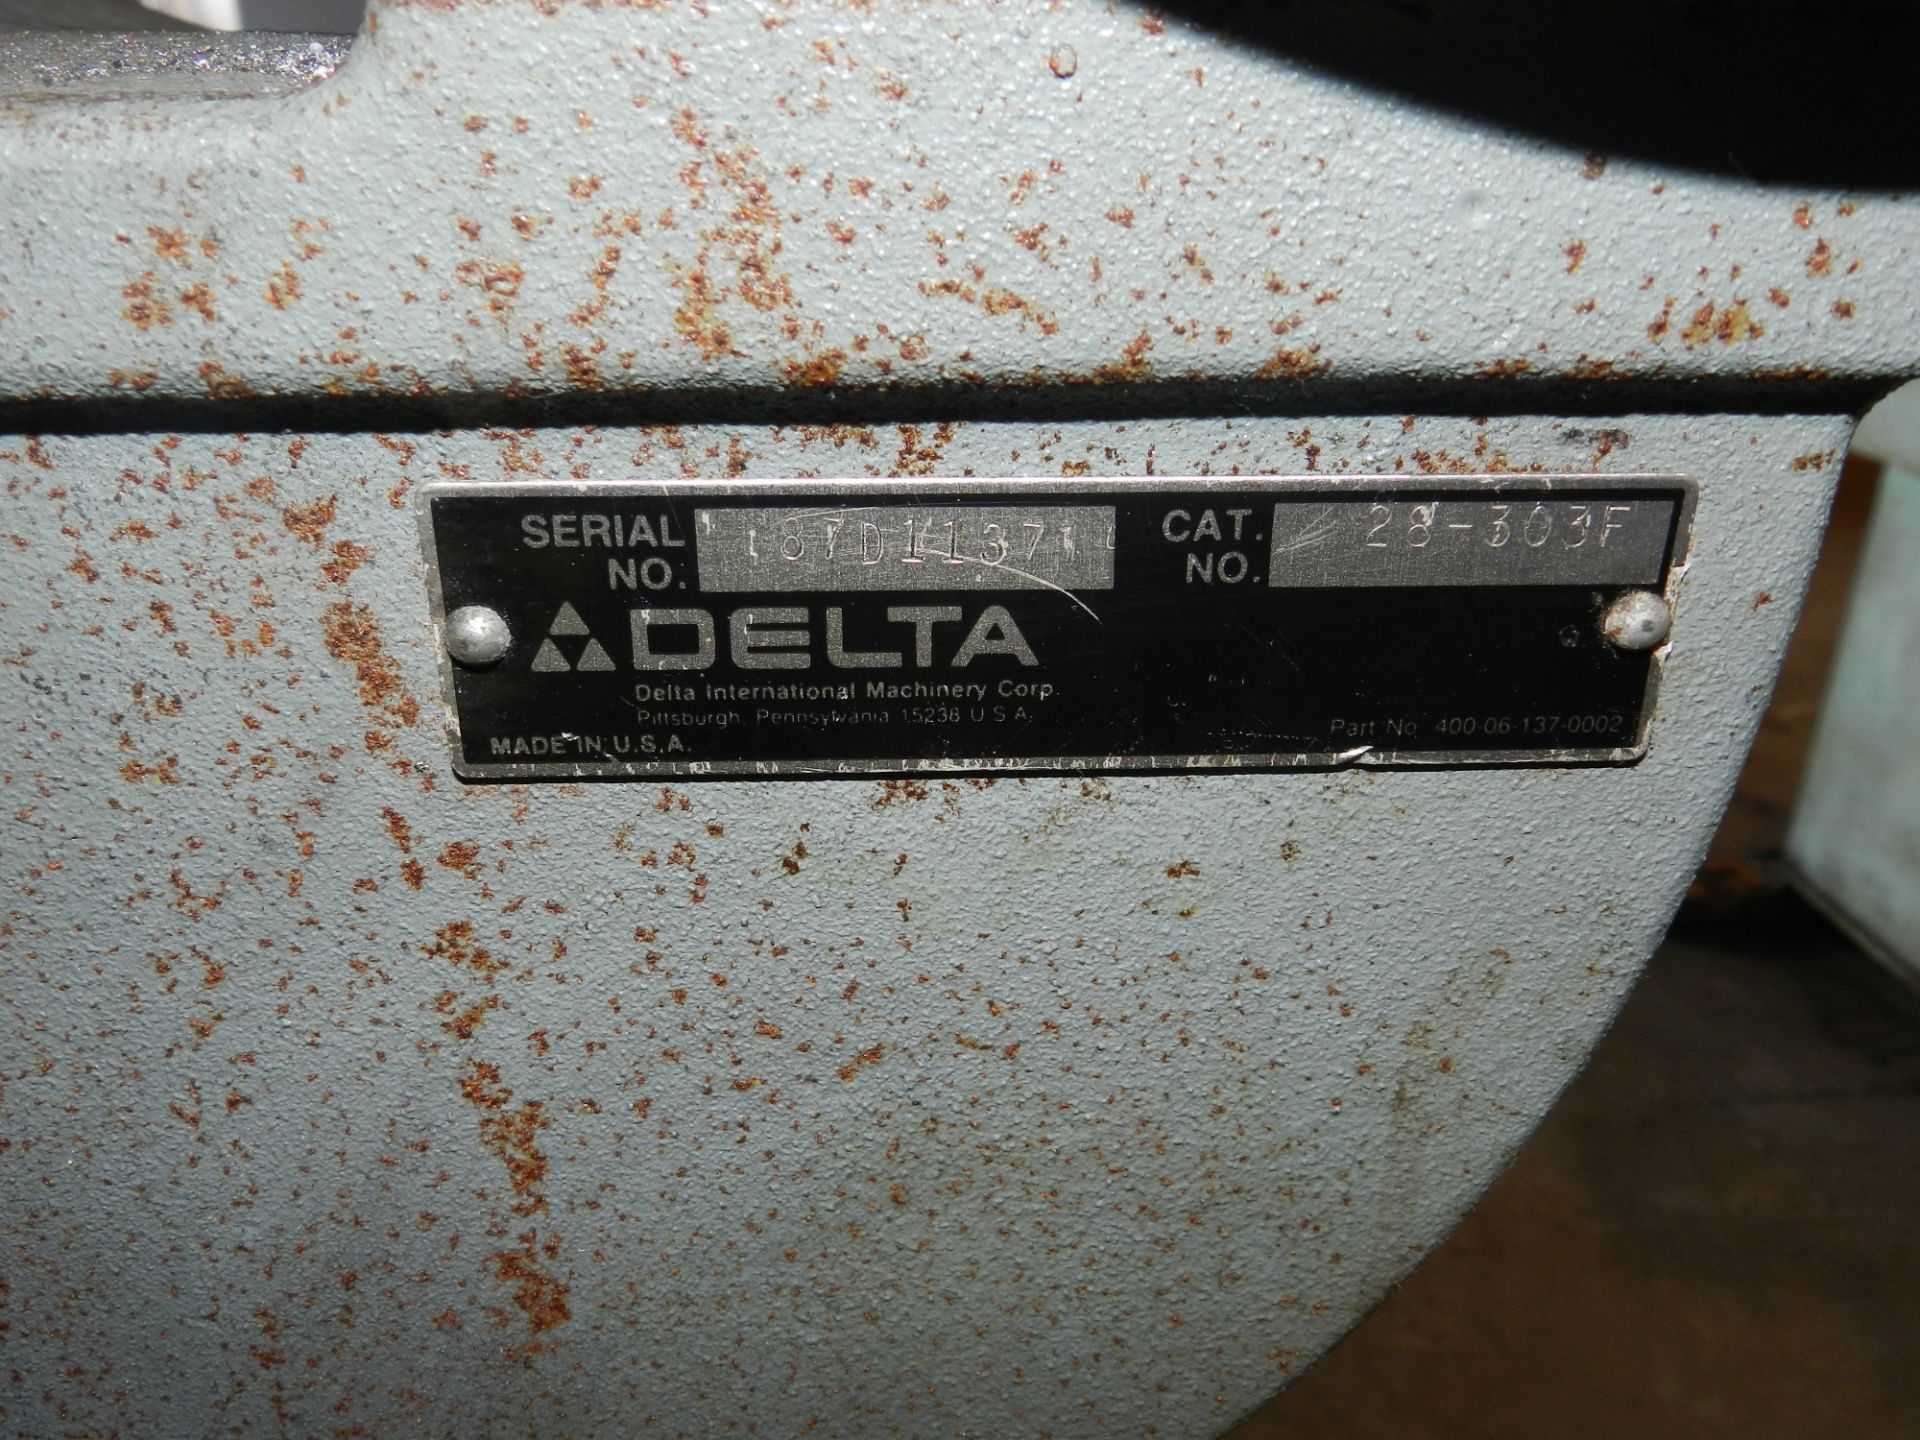 Delta 28-303F 14"" Metal/Wood Vertical Band Saw 3/4HP - Image 8 of 11